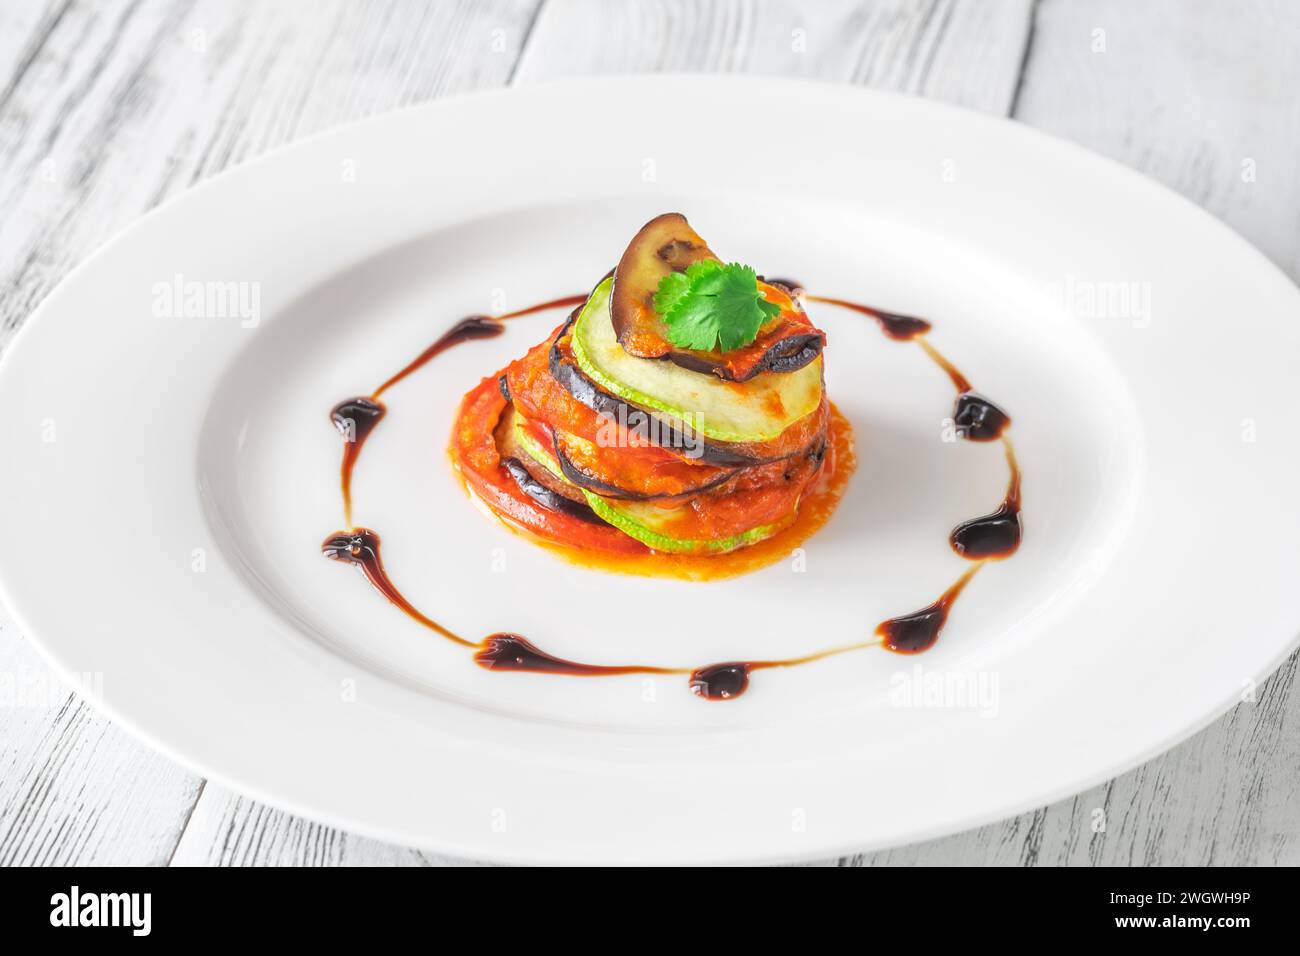 Ratatouille dish of stewed vegetables on the plate Stock Photo